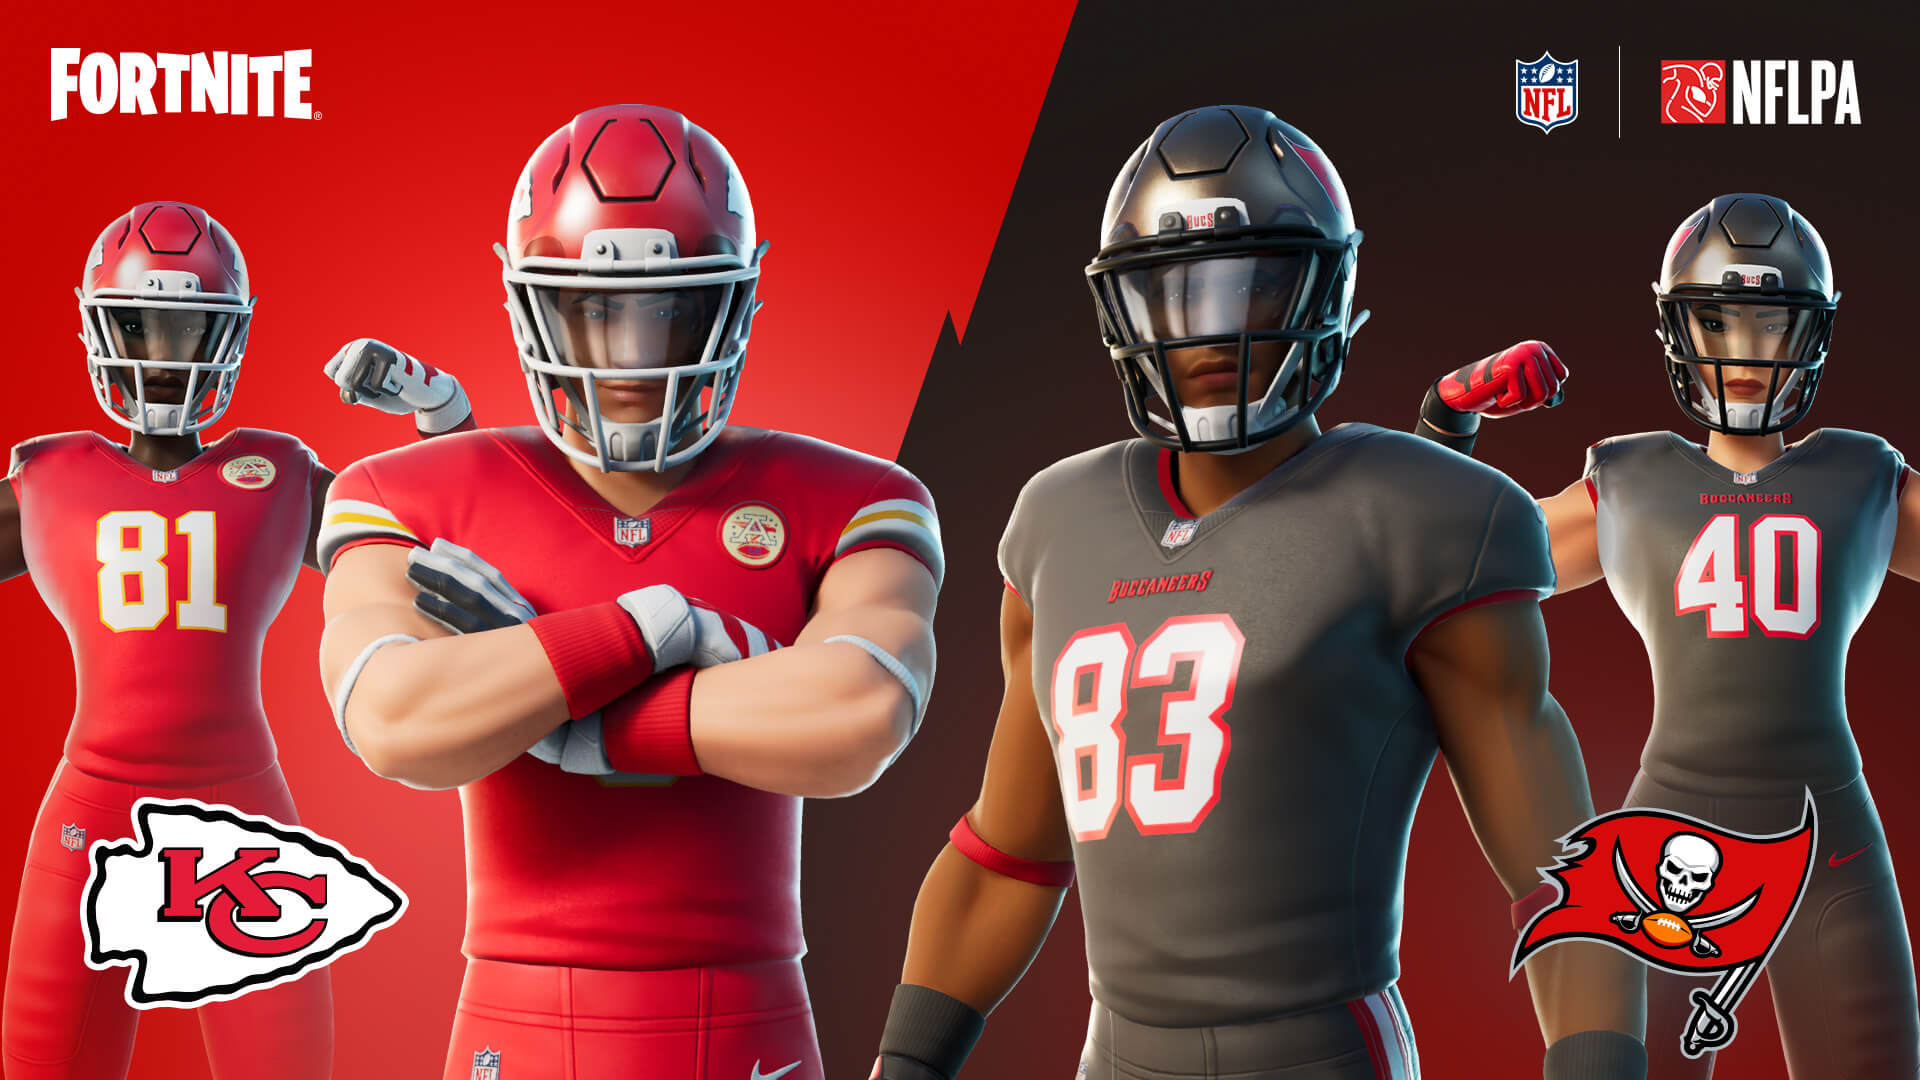 Fortnite Nfl Super Bowl Week Events How To Watch Twitch Rivals Streamer Bowl Ii Tom S Guide